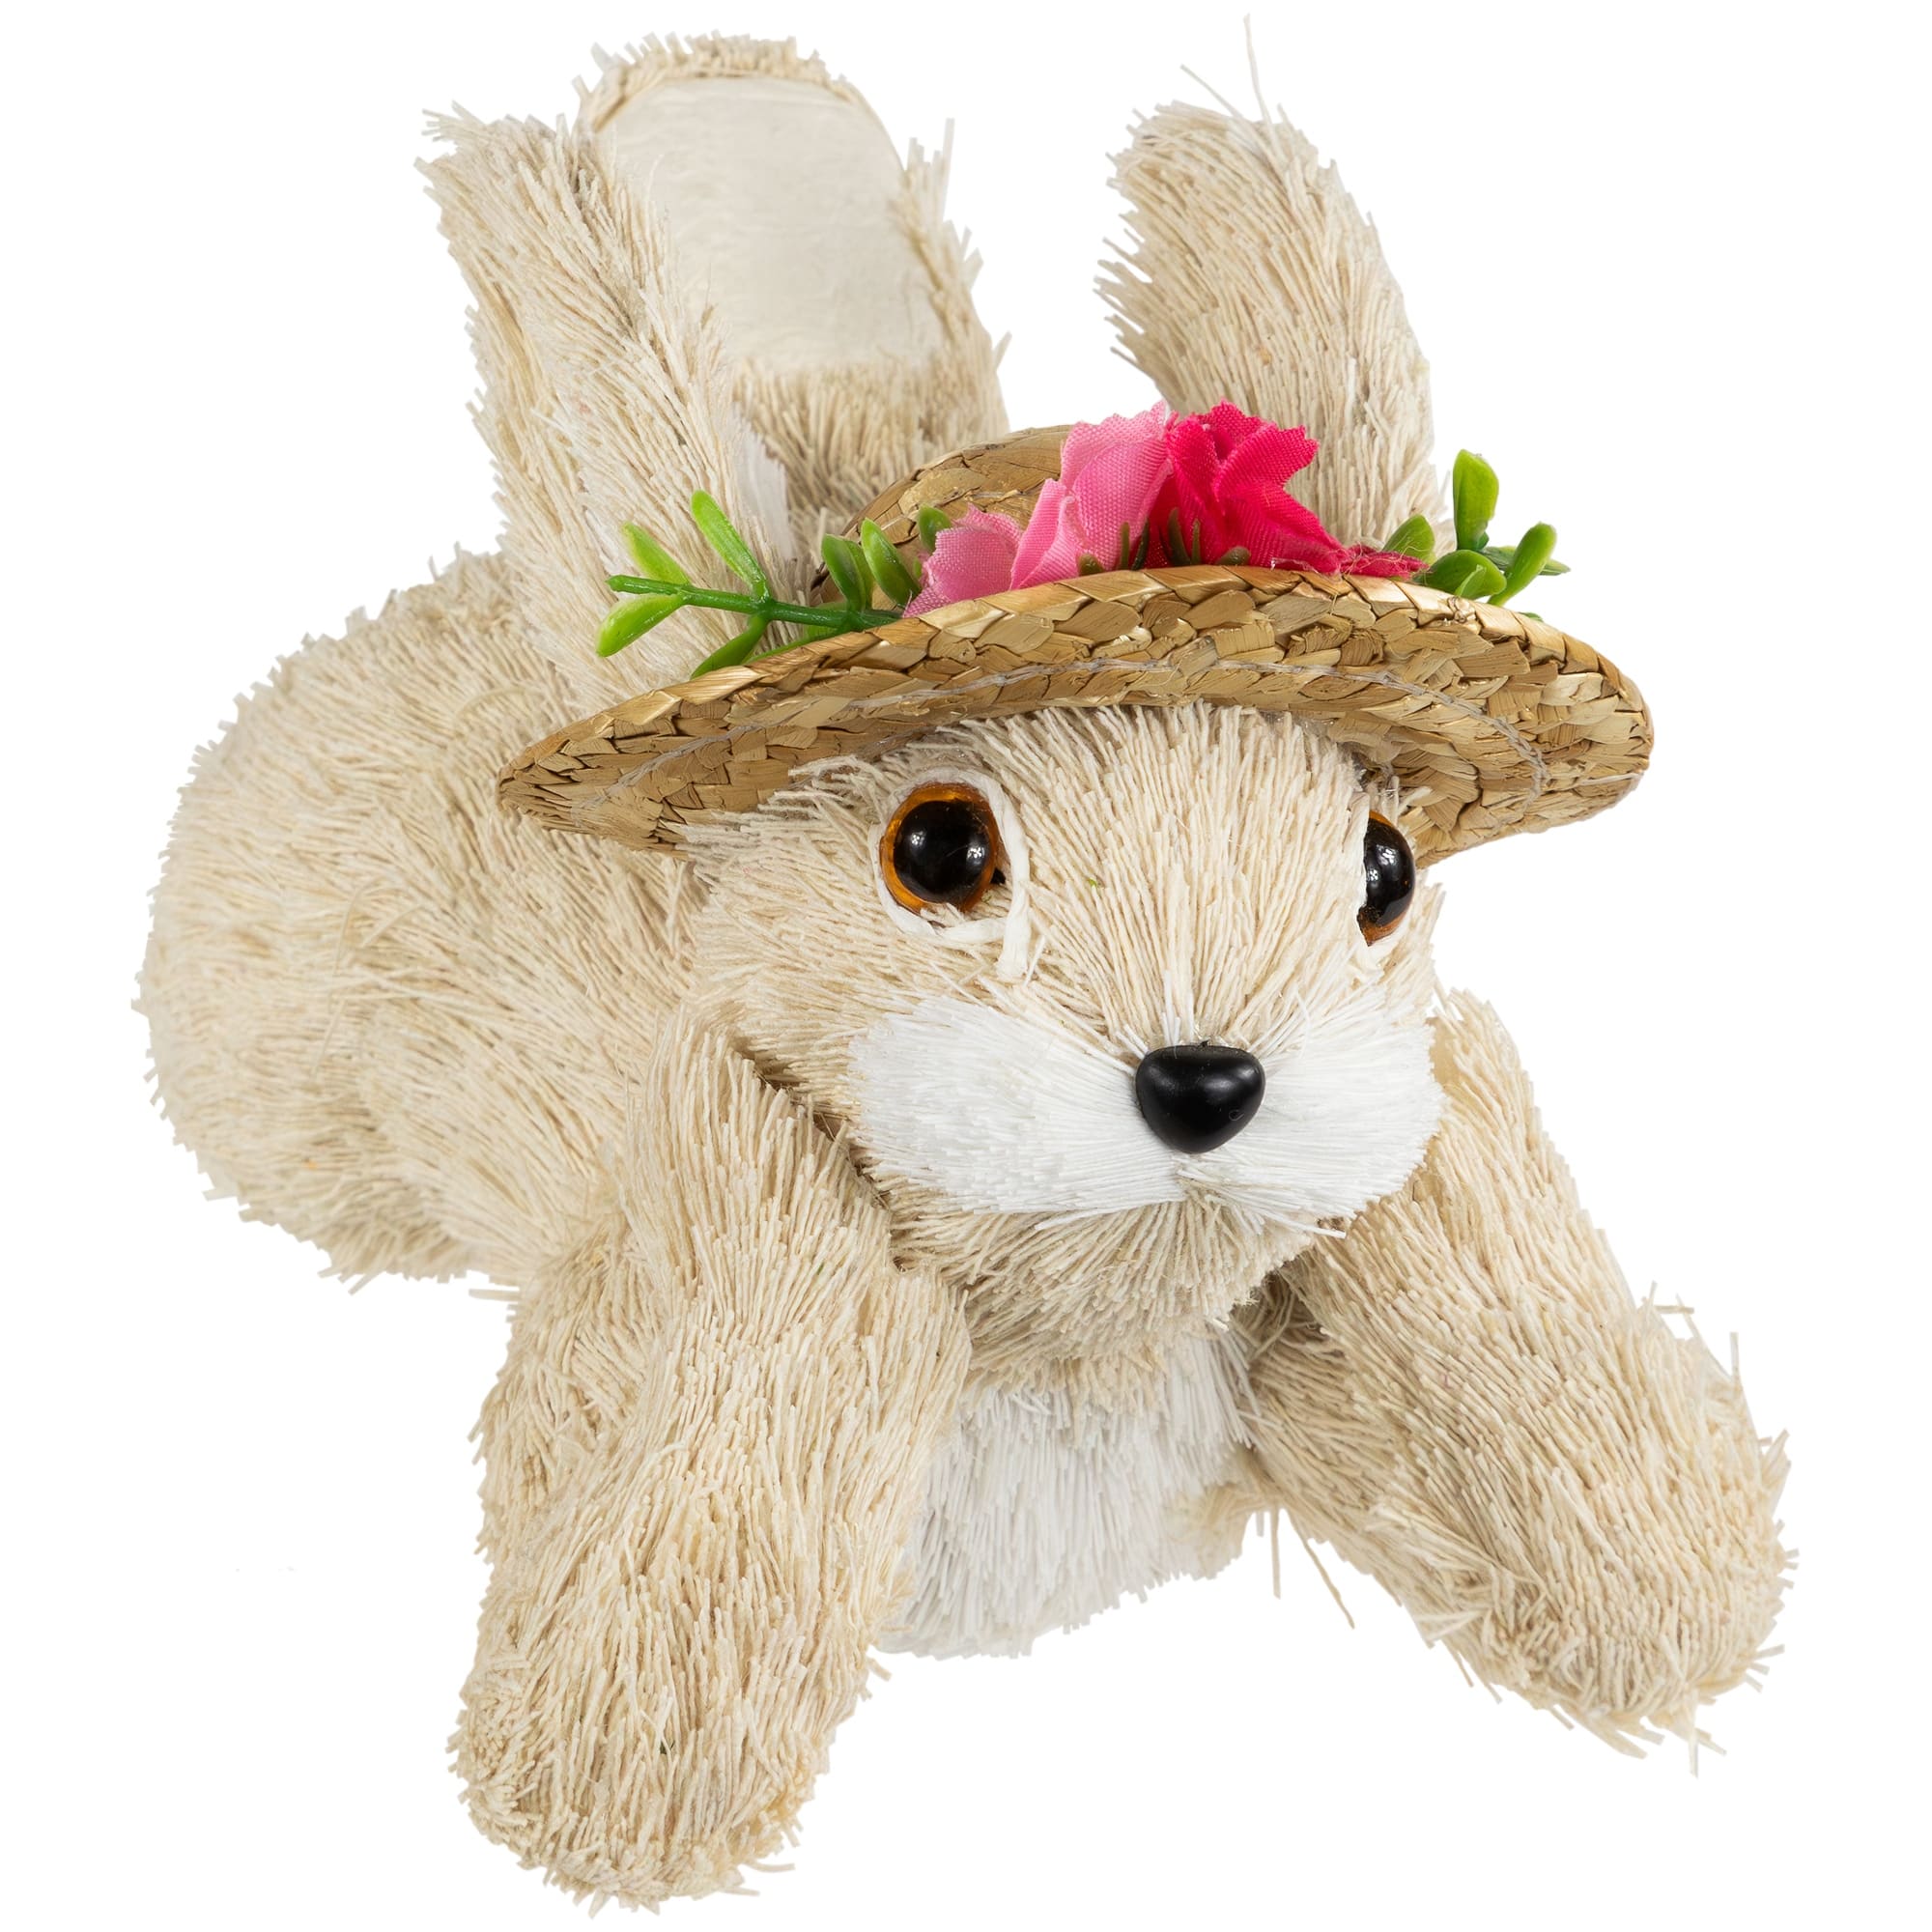 Rabbit with Floral Straw Hat Easter Figurine - 8.75